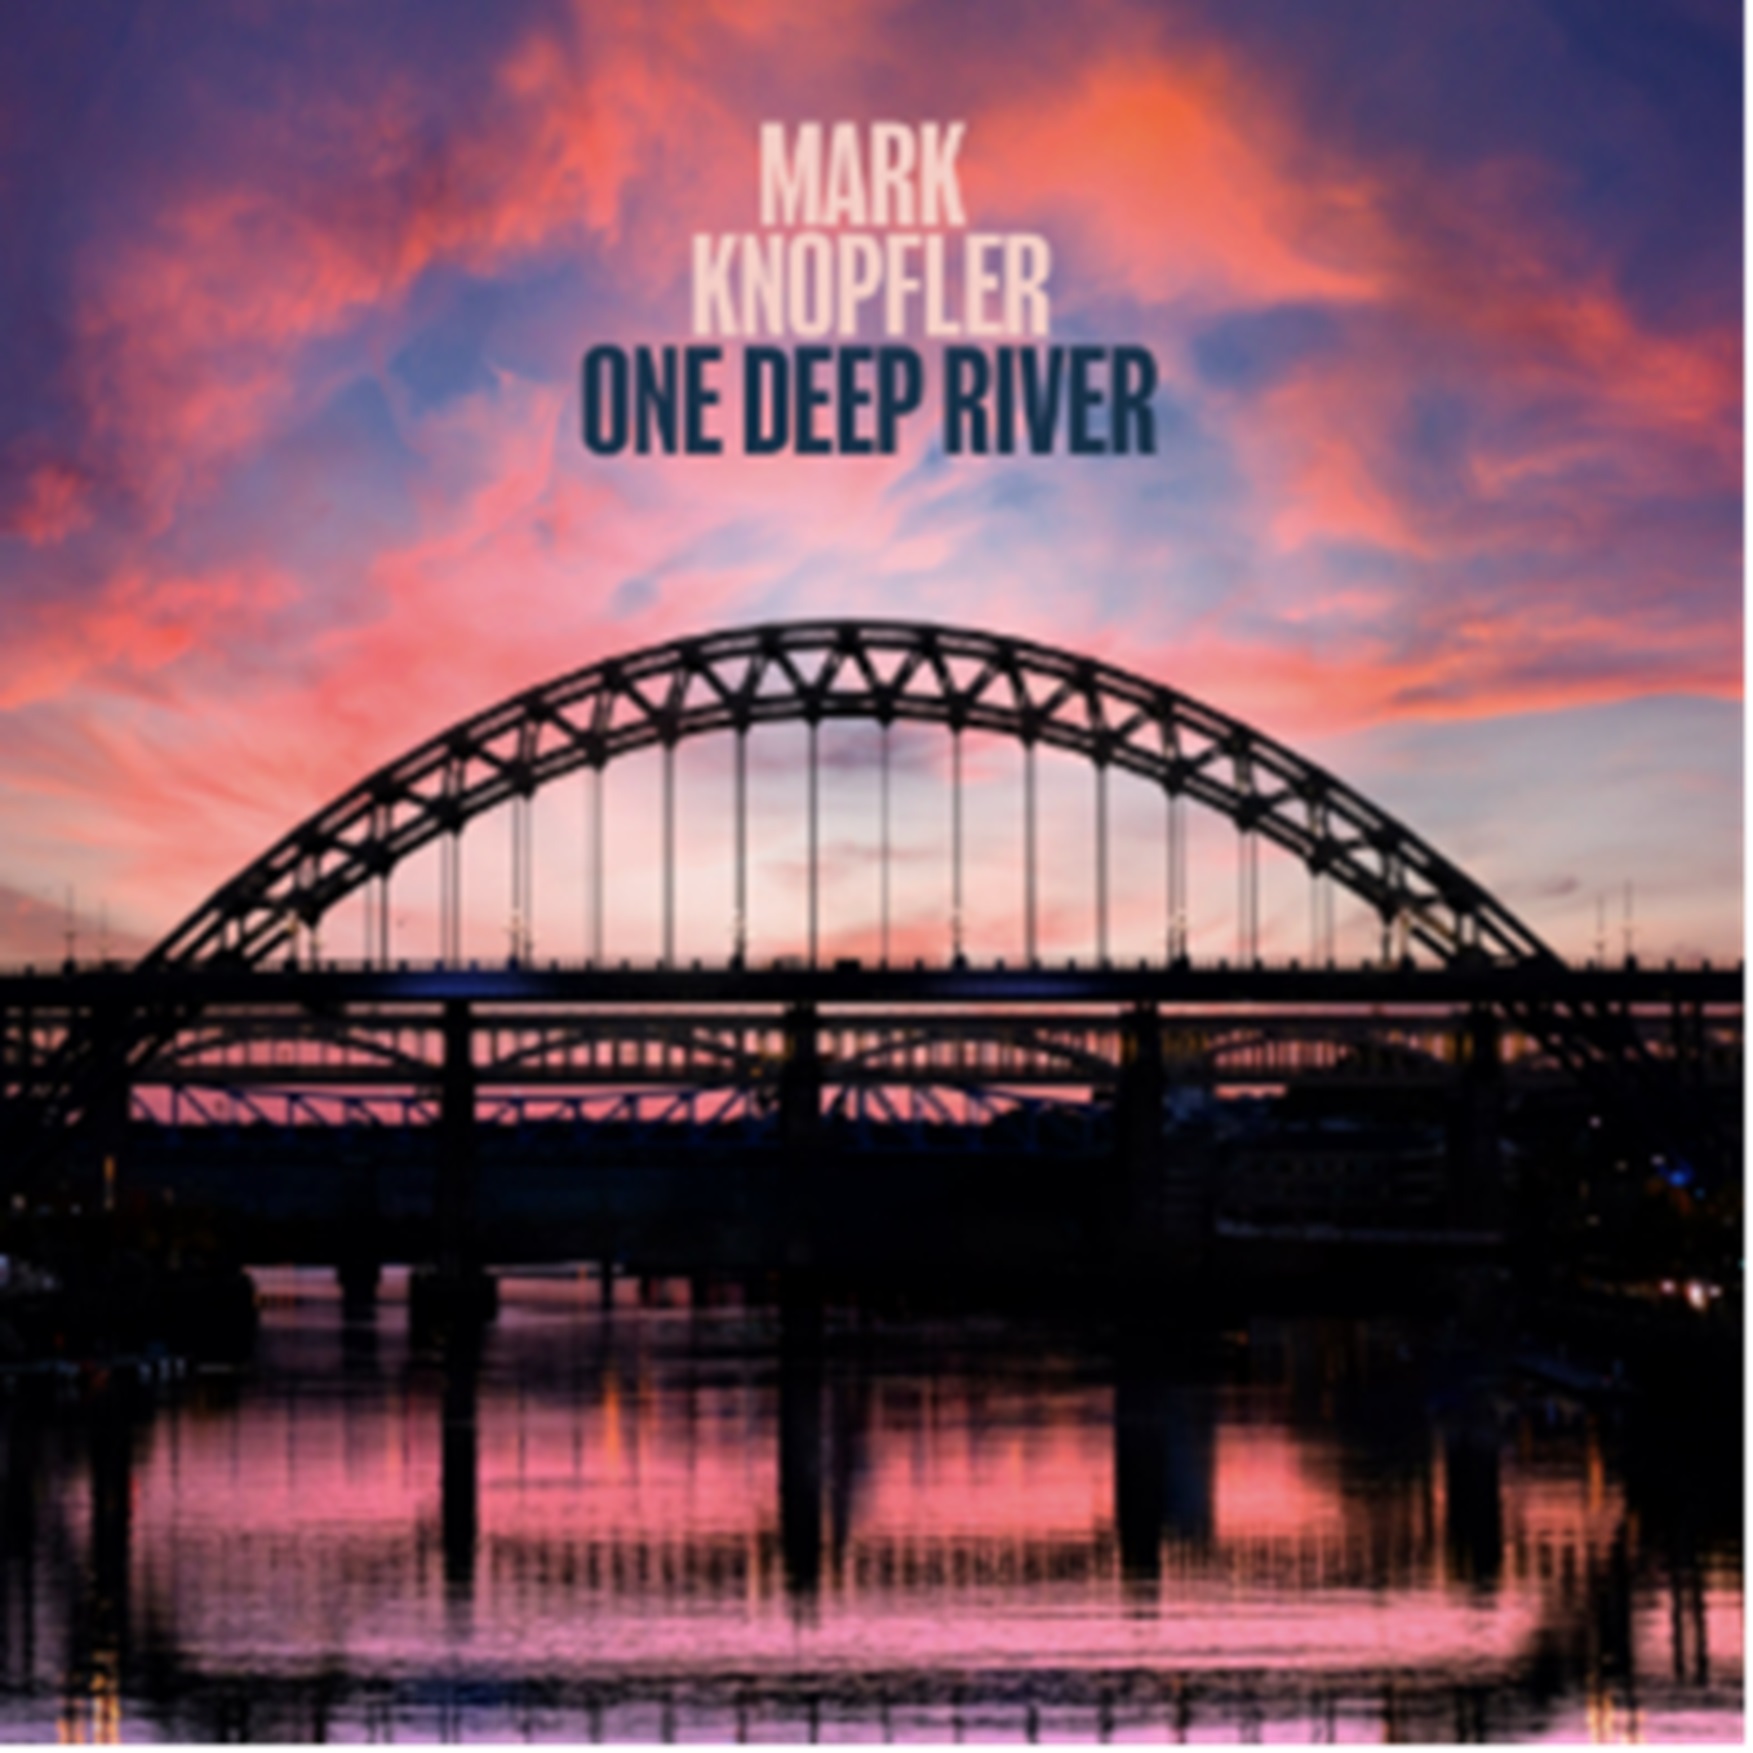 Mark Knopfler's new album "One Deep River" out now